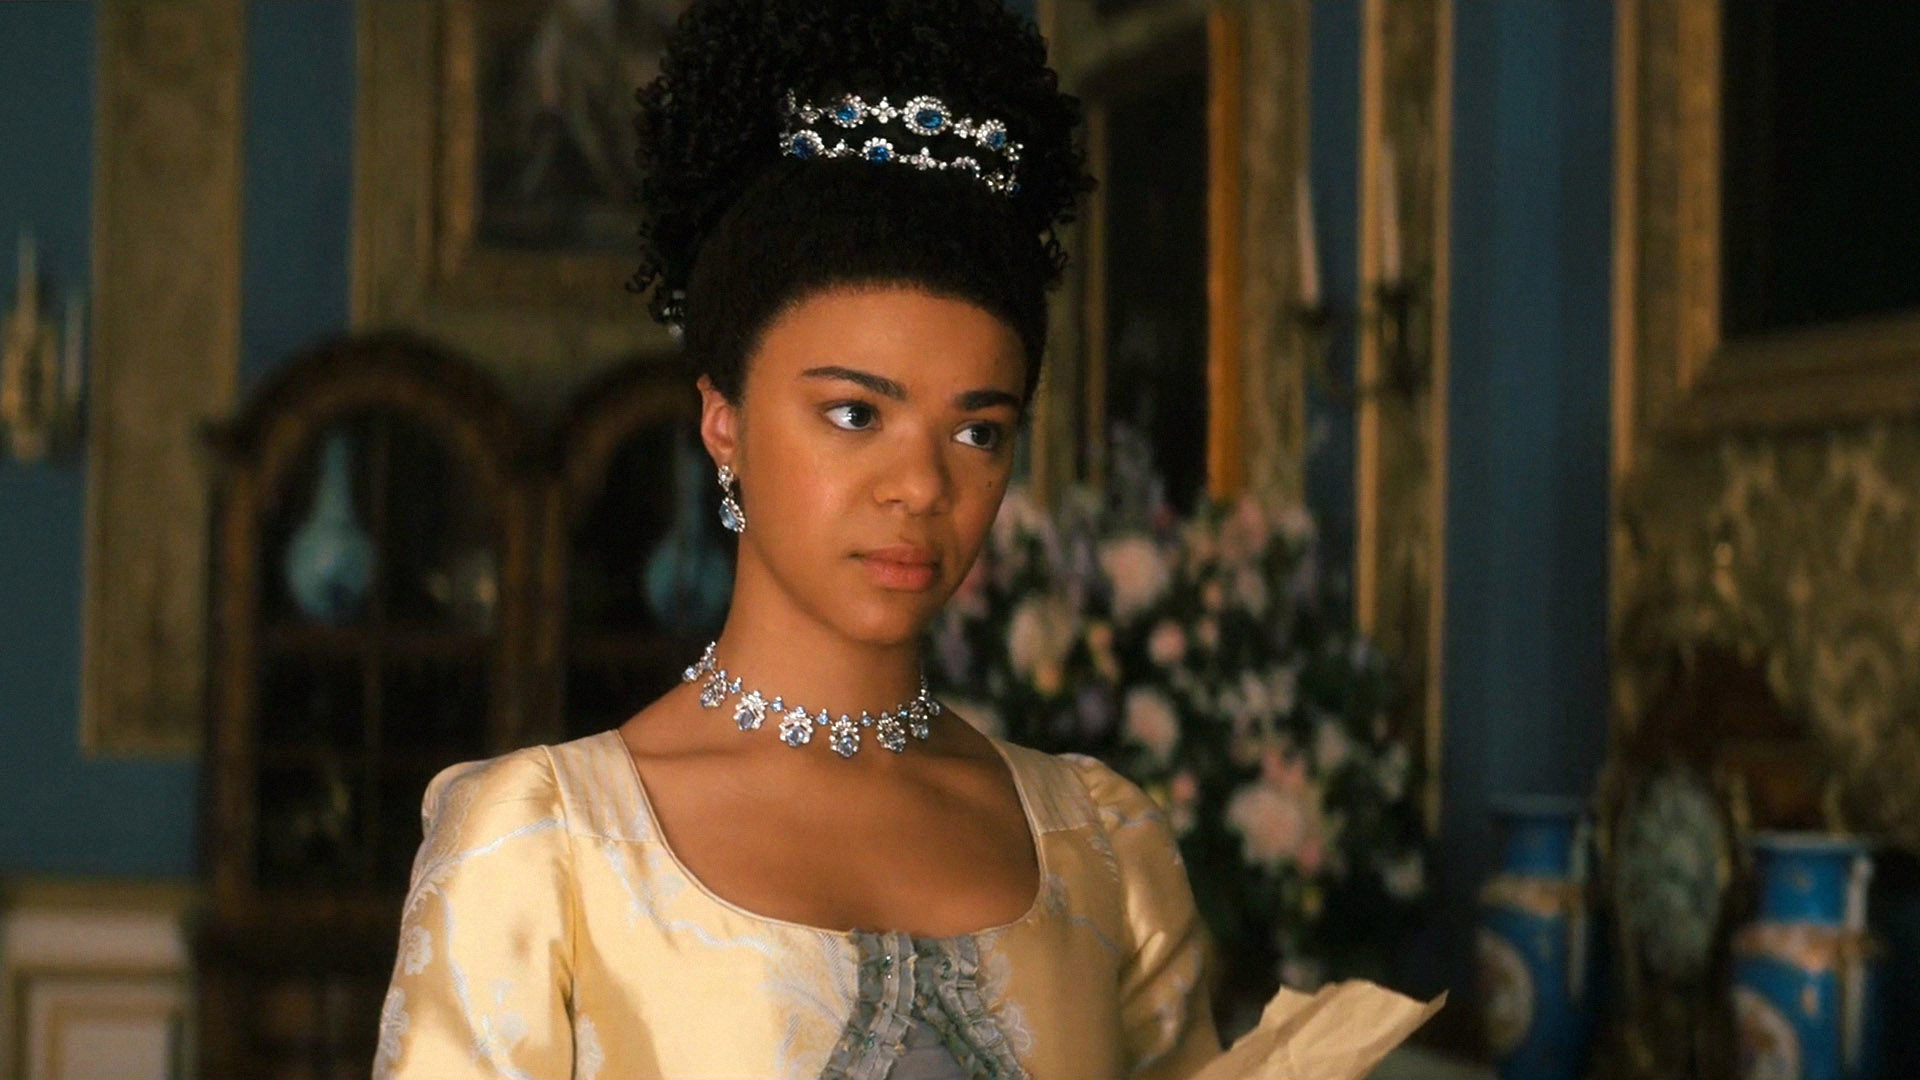 5 Heartbreaking Details in Queen Charlotte We Only Noticed on Rewatch